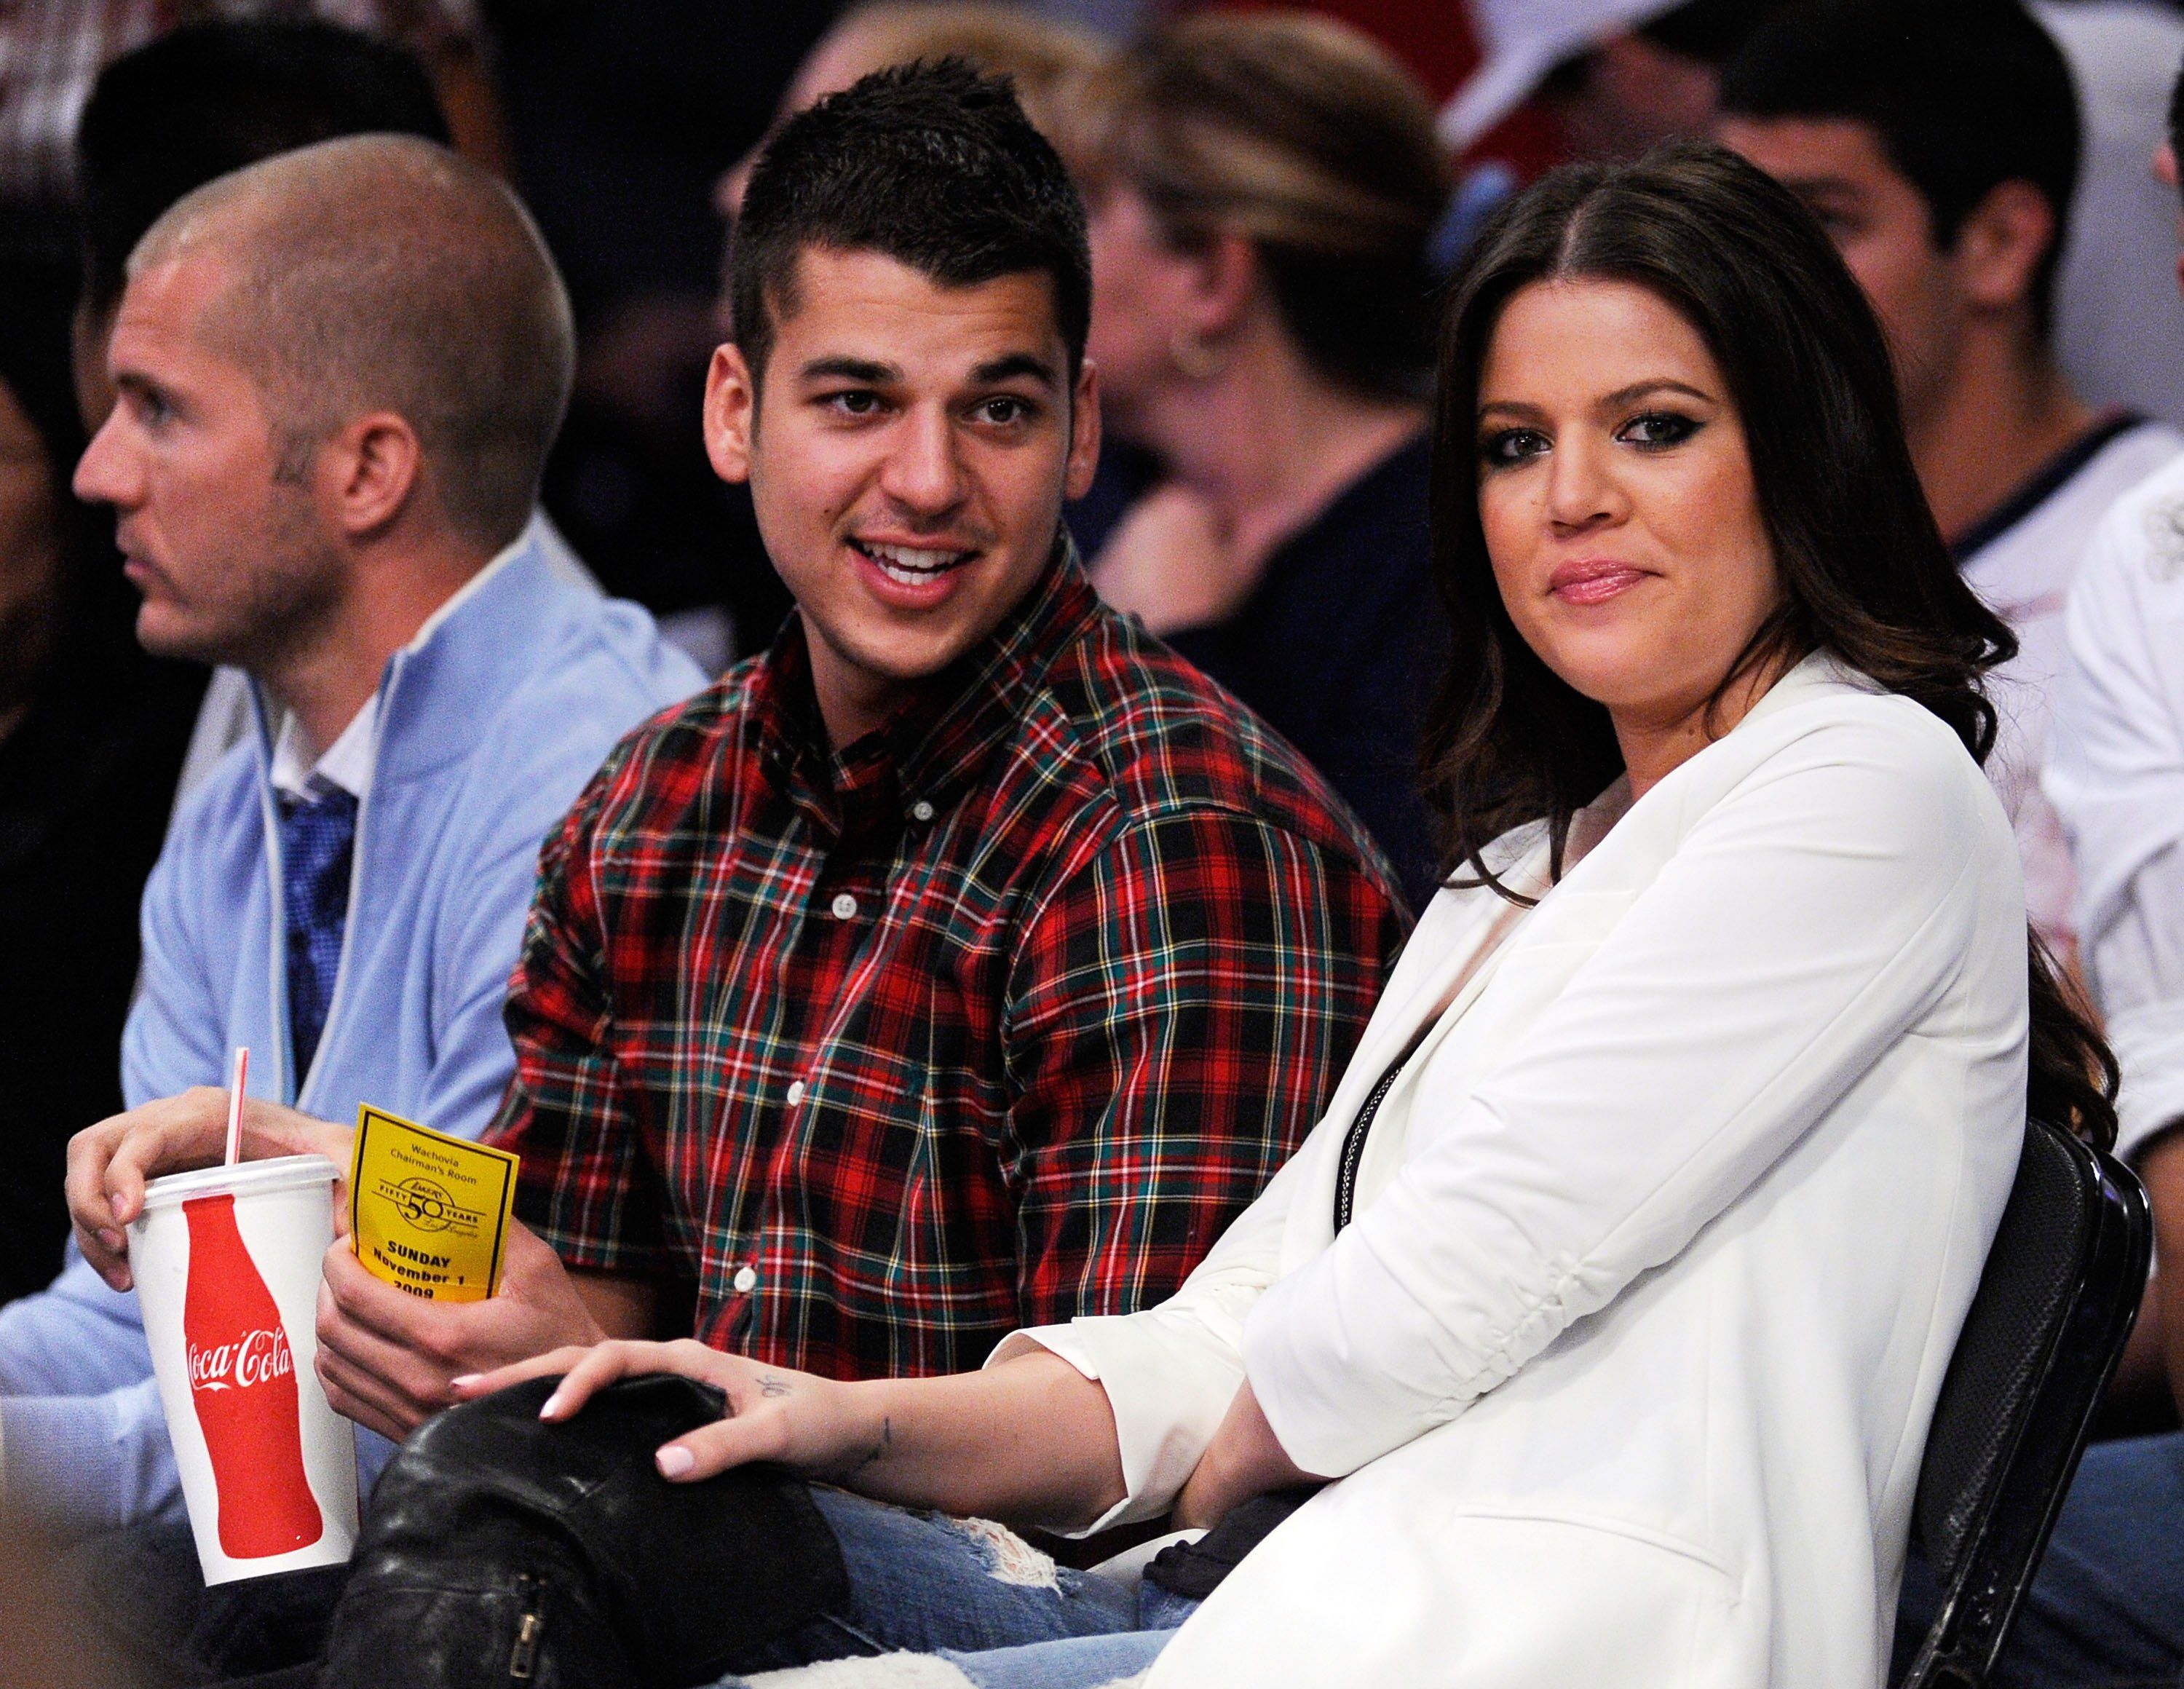 Rob and Khloé Kardashian at a Lakers/ Atlanta Hawks game at Staples Center in November 2009 / Source: Getty Images